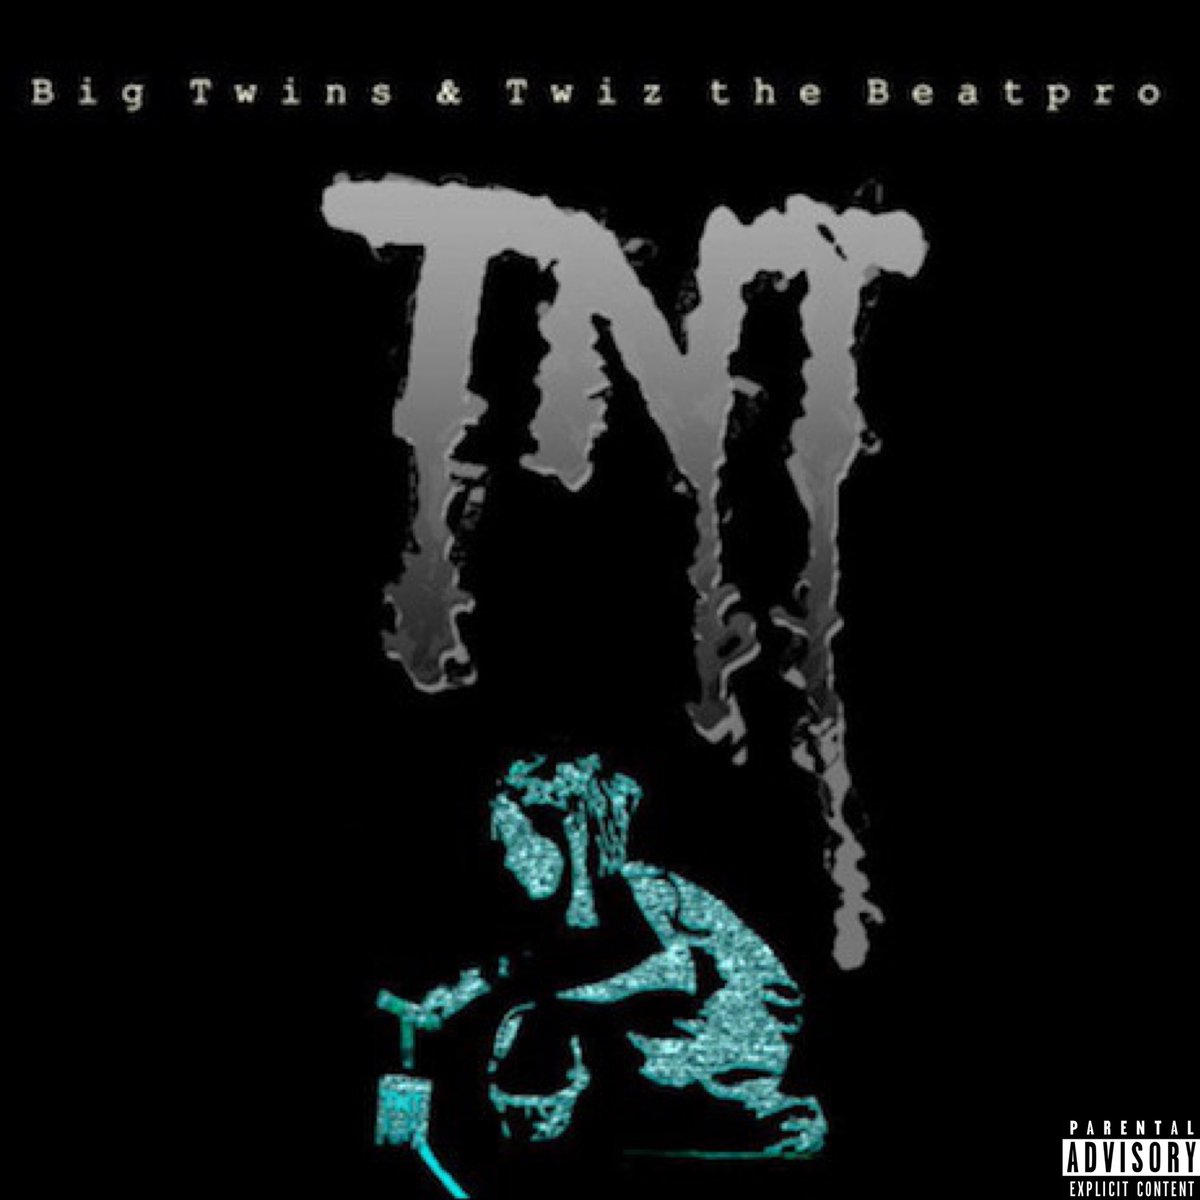 5 years ago today, Infamous Mobb member @BigTwinsQB released his 4th album TNT (which was entirely produced by @TwizTheBeatPro) instagram.com/p/CNG_VLlrcAg/…